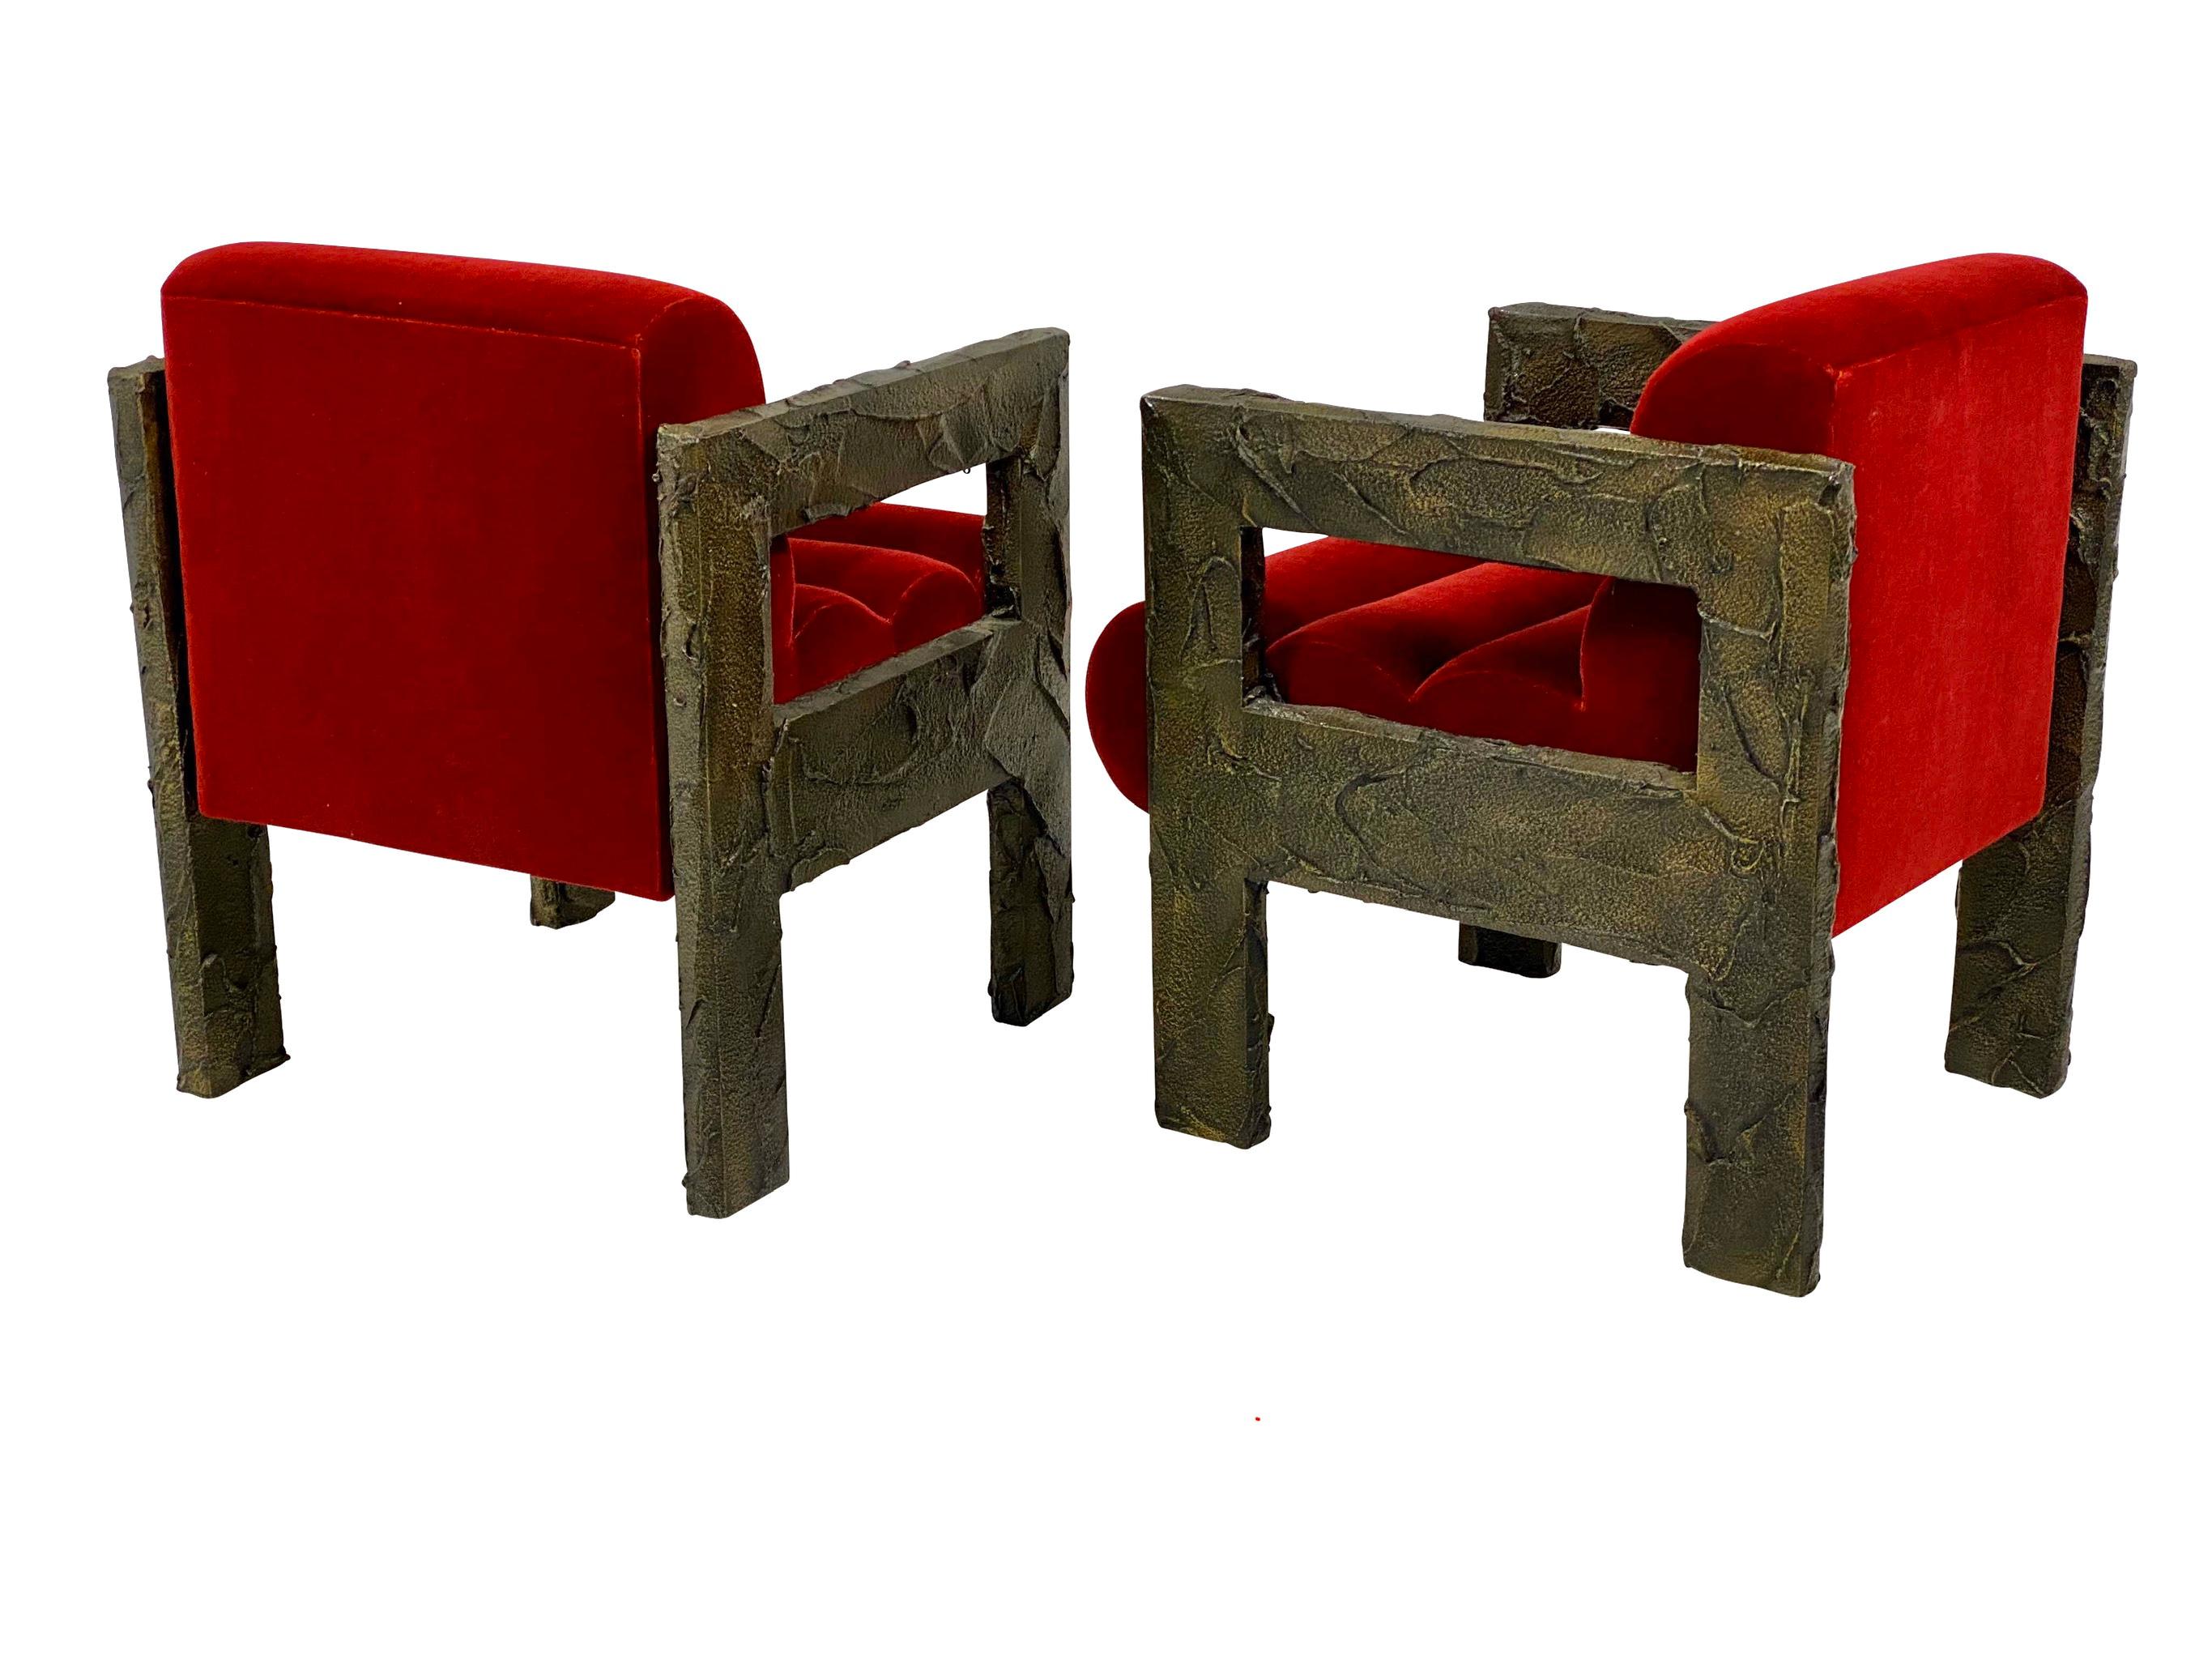 Rare lounge chairs by Paul Evans, circa 1968. Sculpted bronze frames with new mohair upholstery. Will be accompanied with “Certificate of Authenticity” by Dorsey Reading.